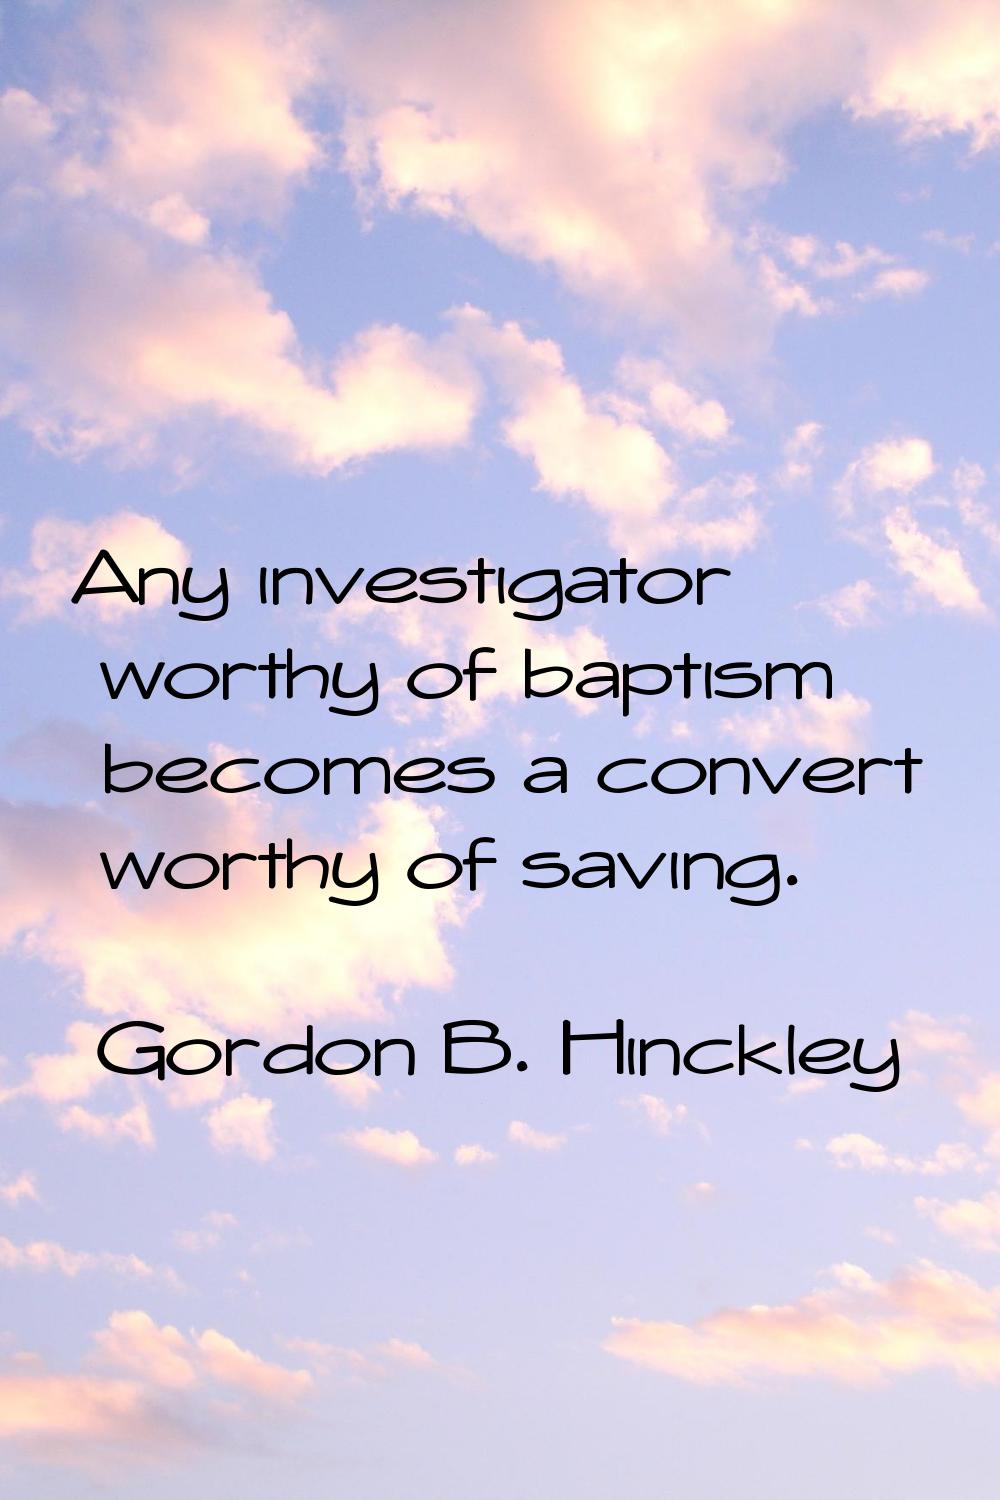 Any investigator worthy of baptism becomes a convert worthy of saving.